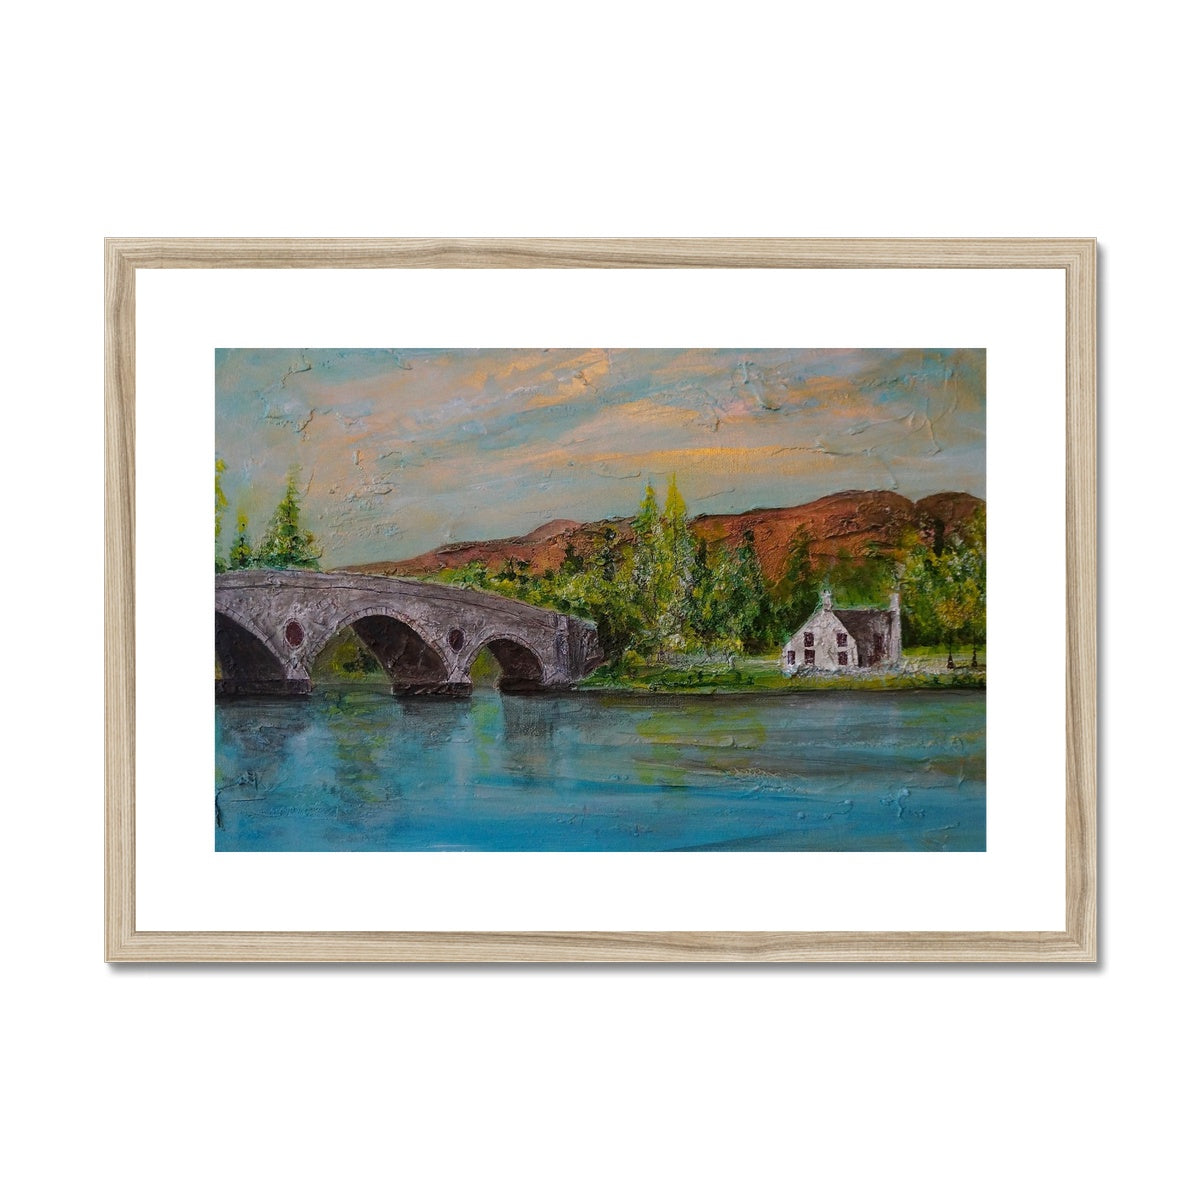 Kenmore Bridge ii Painting | Framed & Mounted Prints From Scotland-Framed & Mounted Prints-Scottish Highlands & Lowlands Art Gallery-A2 Landscape-Natural Frame-Paintings, Prints, Homeware, Art Gifts From Scotland By Scottish Artist Kevin Hunter